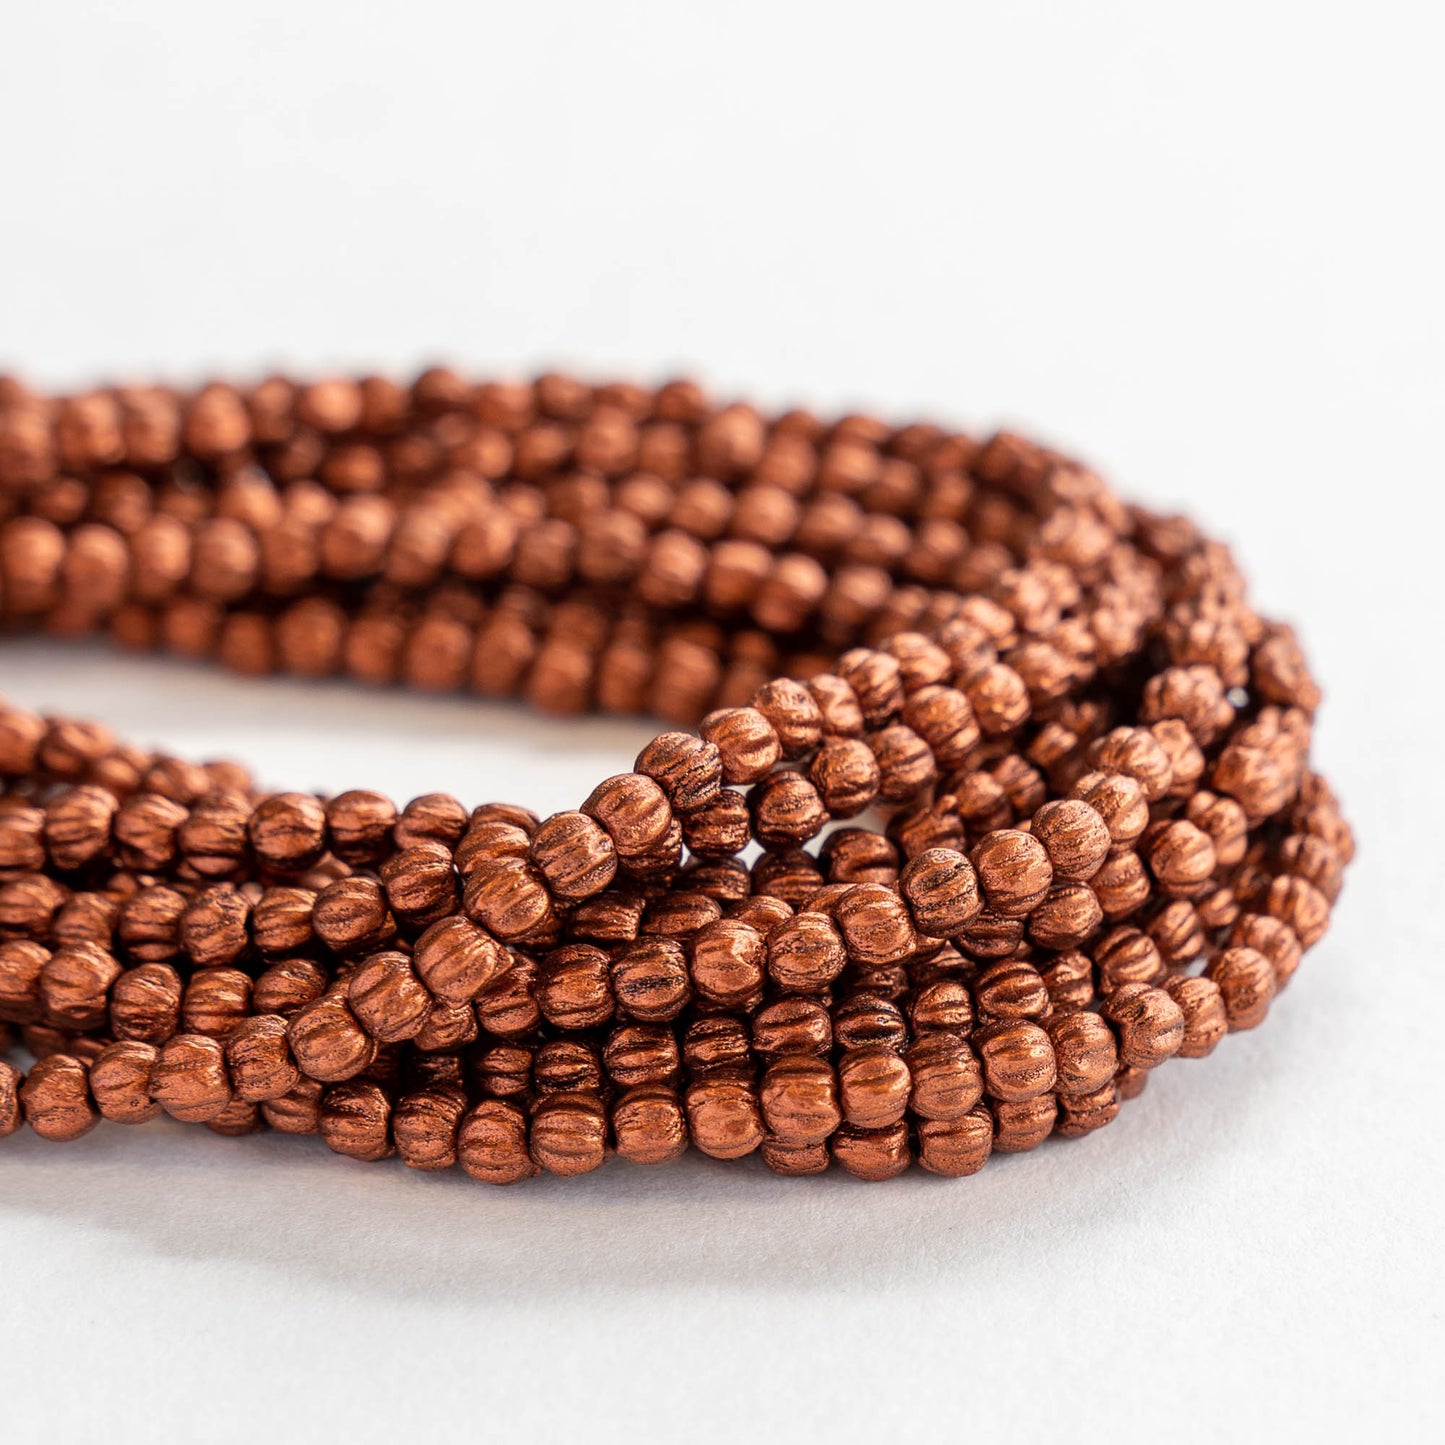 3mm Glass Melon Beads - Copper - 100 Beads